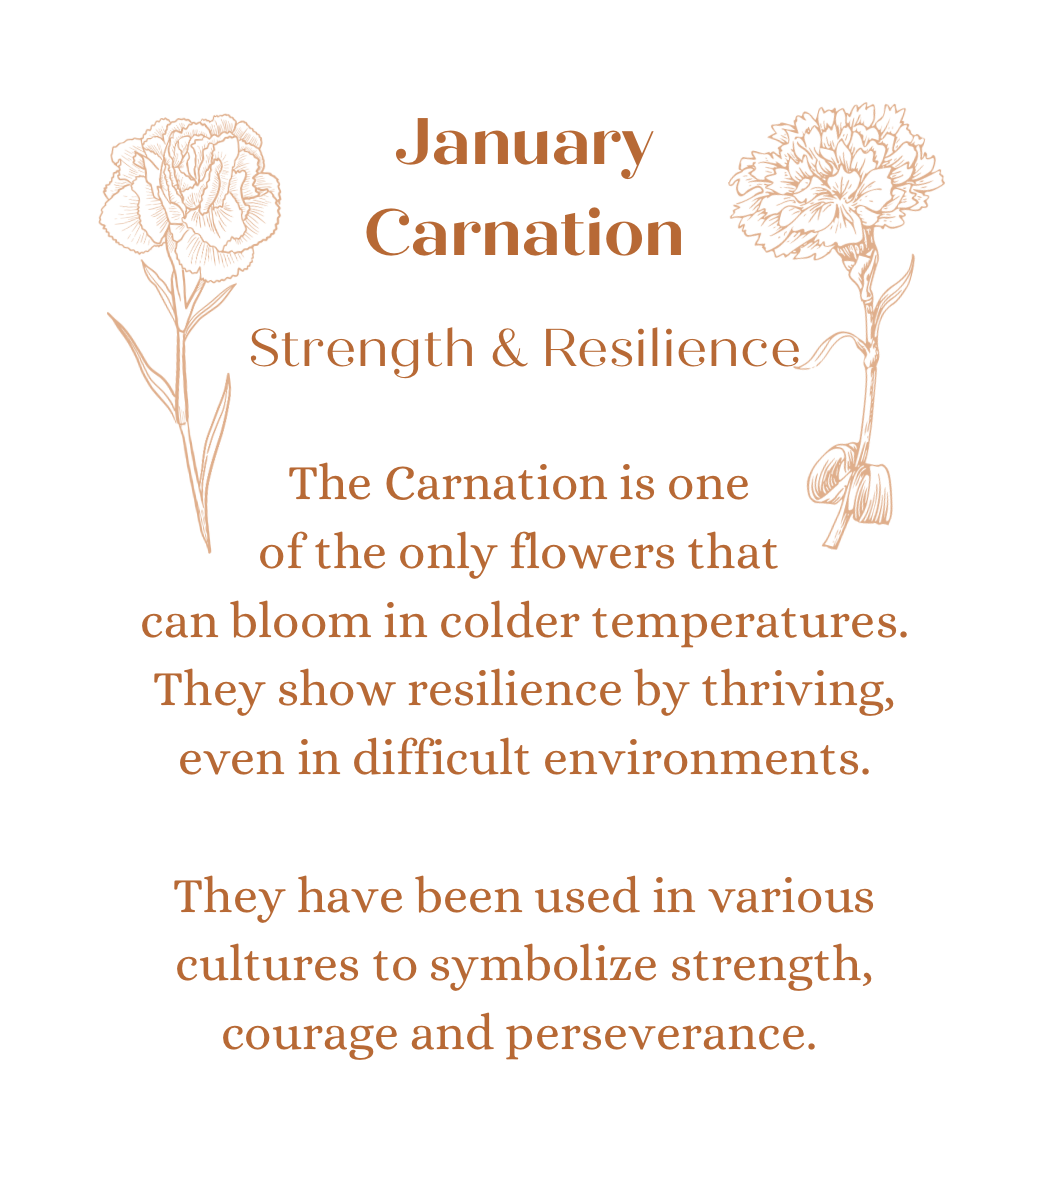 January Carnations in Gaia